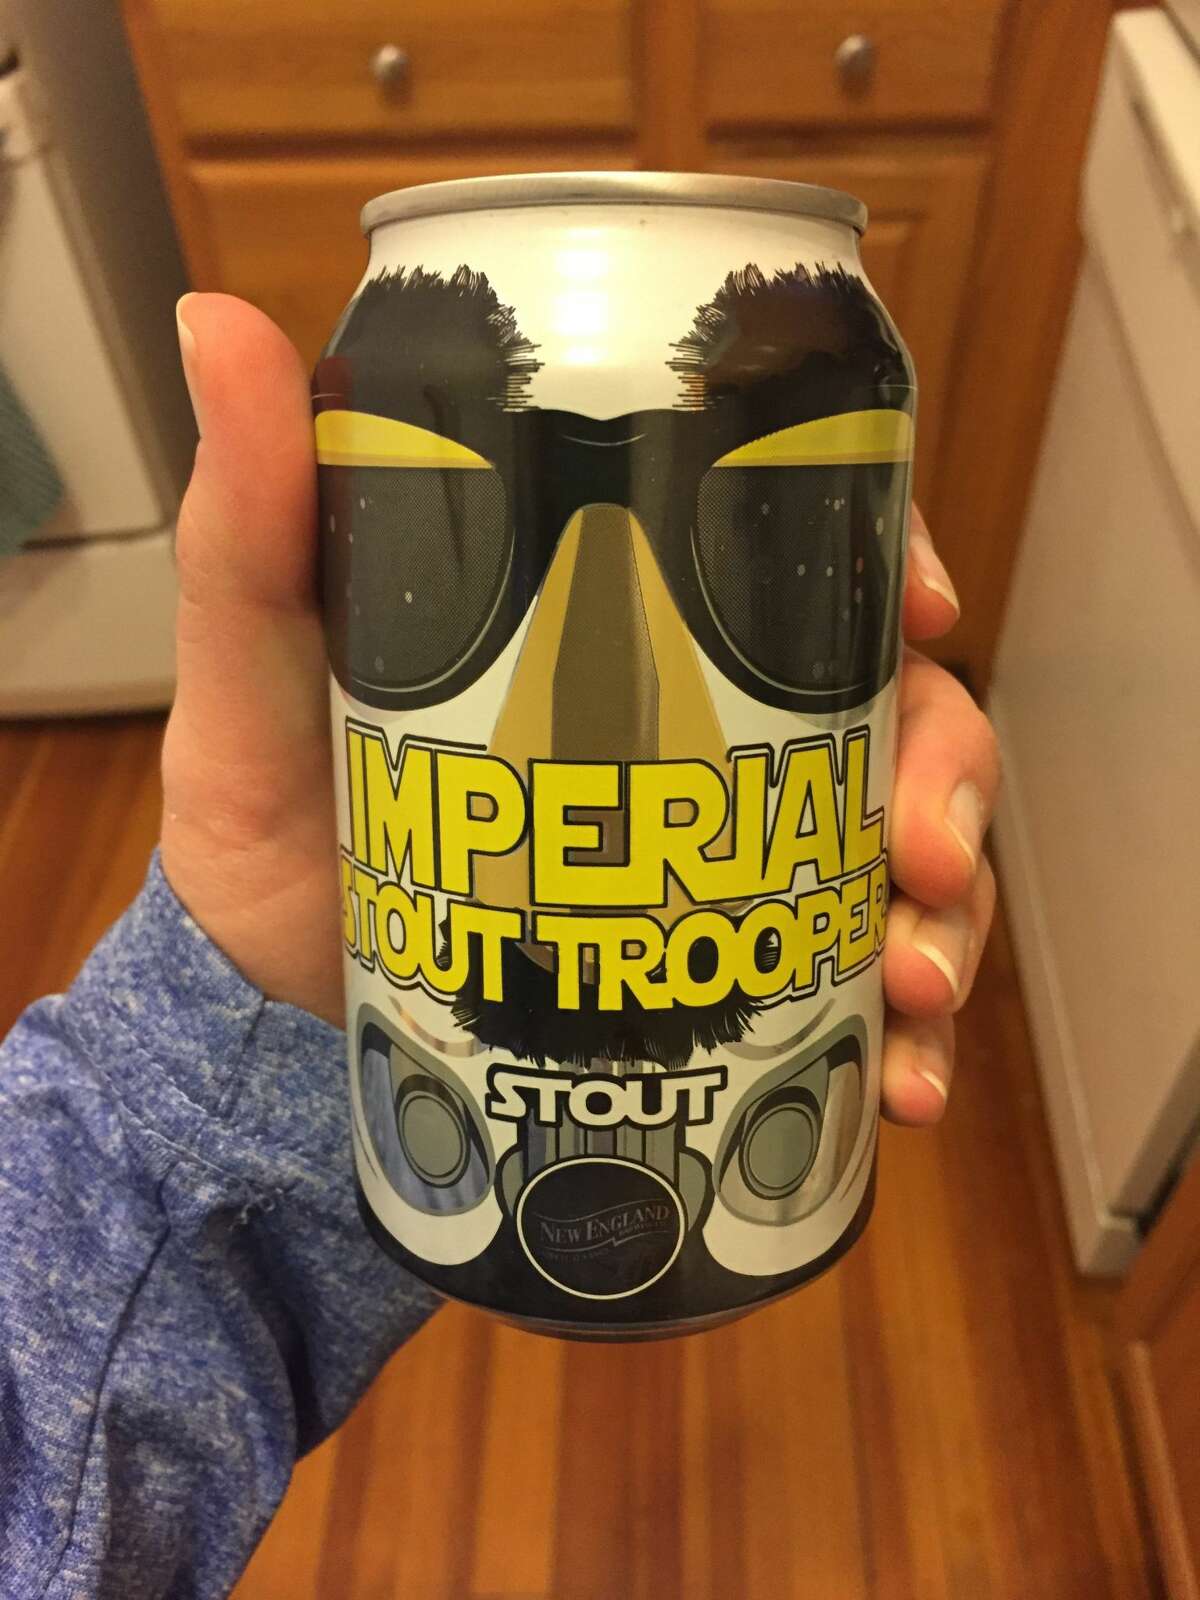 New England Brewing Co. in Woodbridge has been serving their Imperial Stout Trooper since 2014, and it has been flying off shelves ever since.